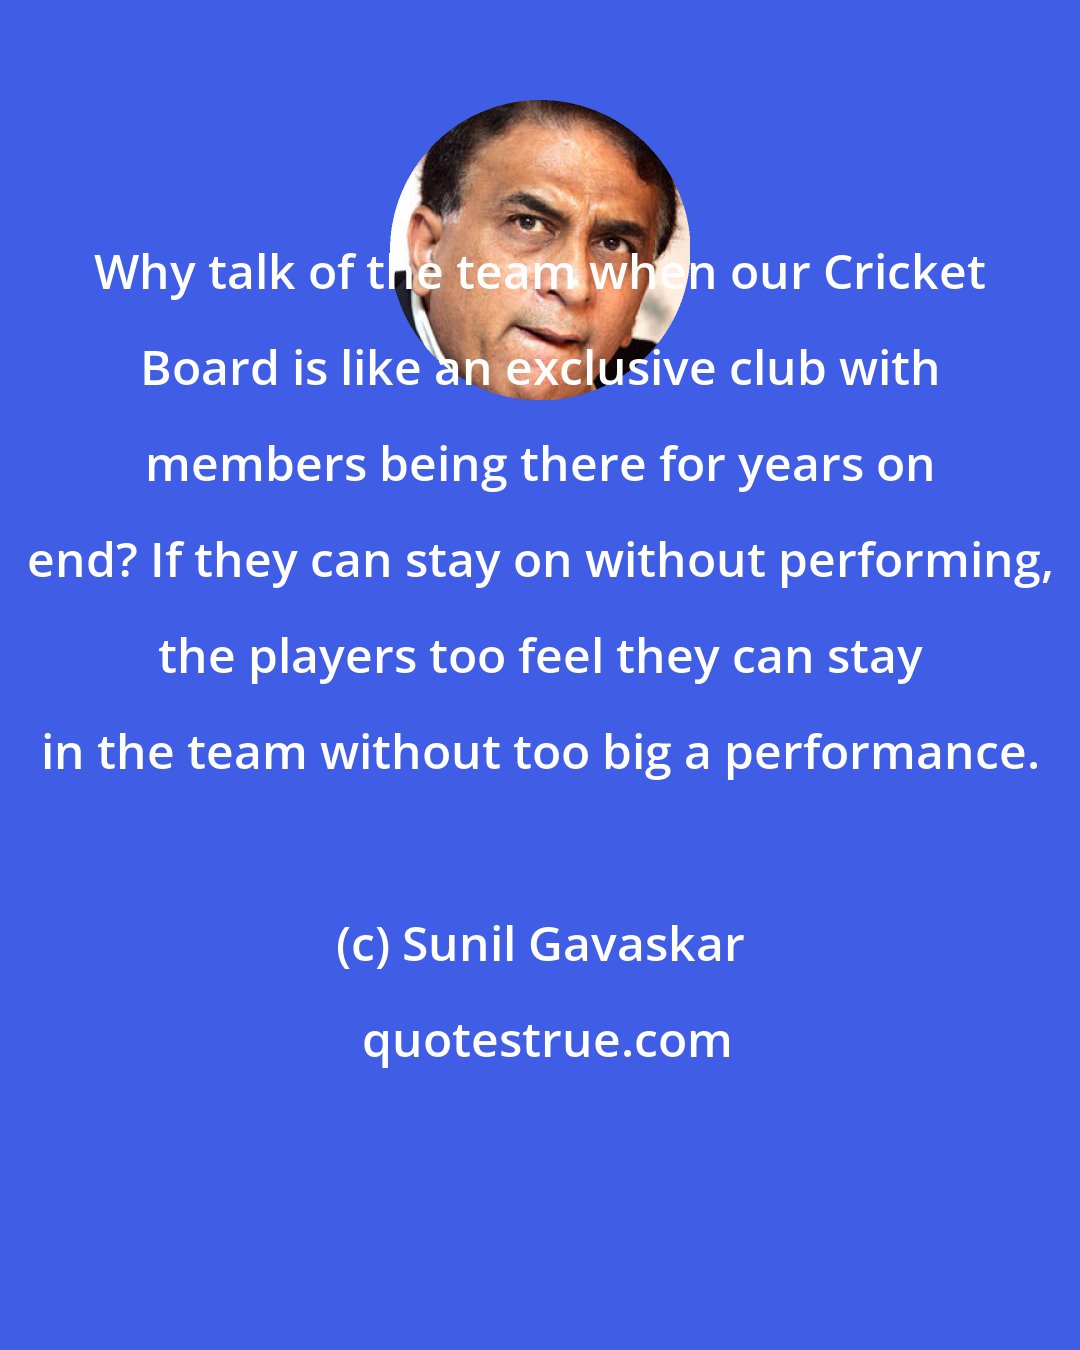 Sunil Gavaskar: Why talk of the team when our Cricket Board is like an exclusive club with members being there for years on end? If they can stay on without performing, the players too feel they can stay in the team without too big a performance.